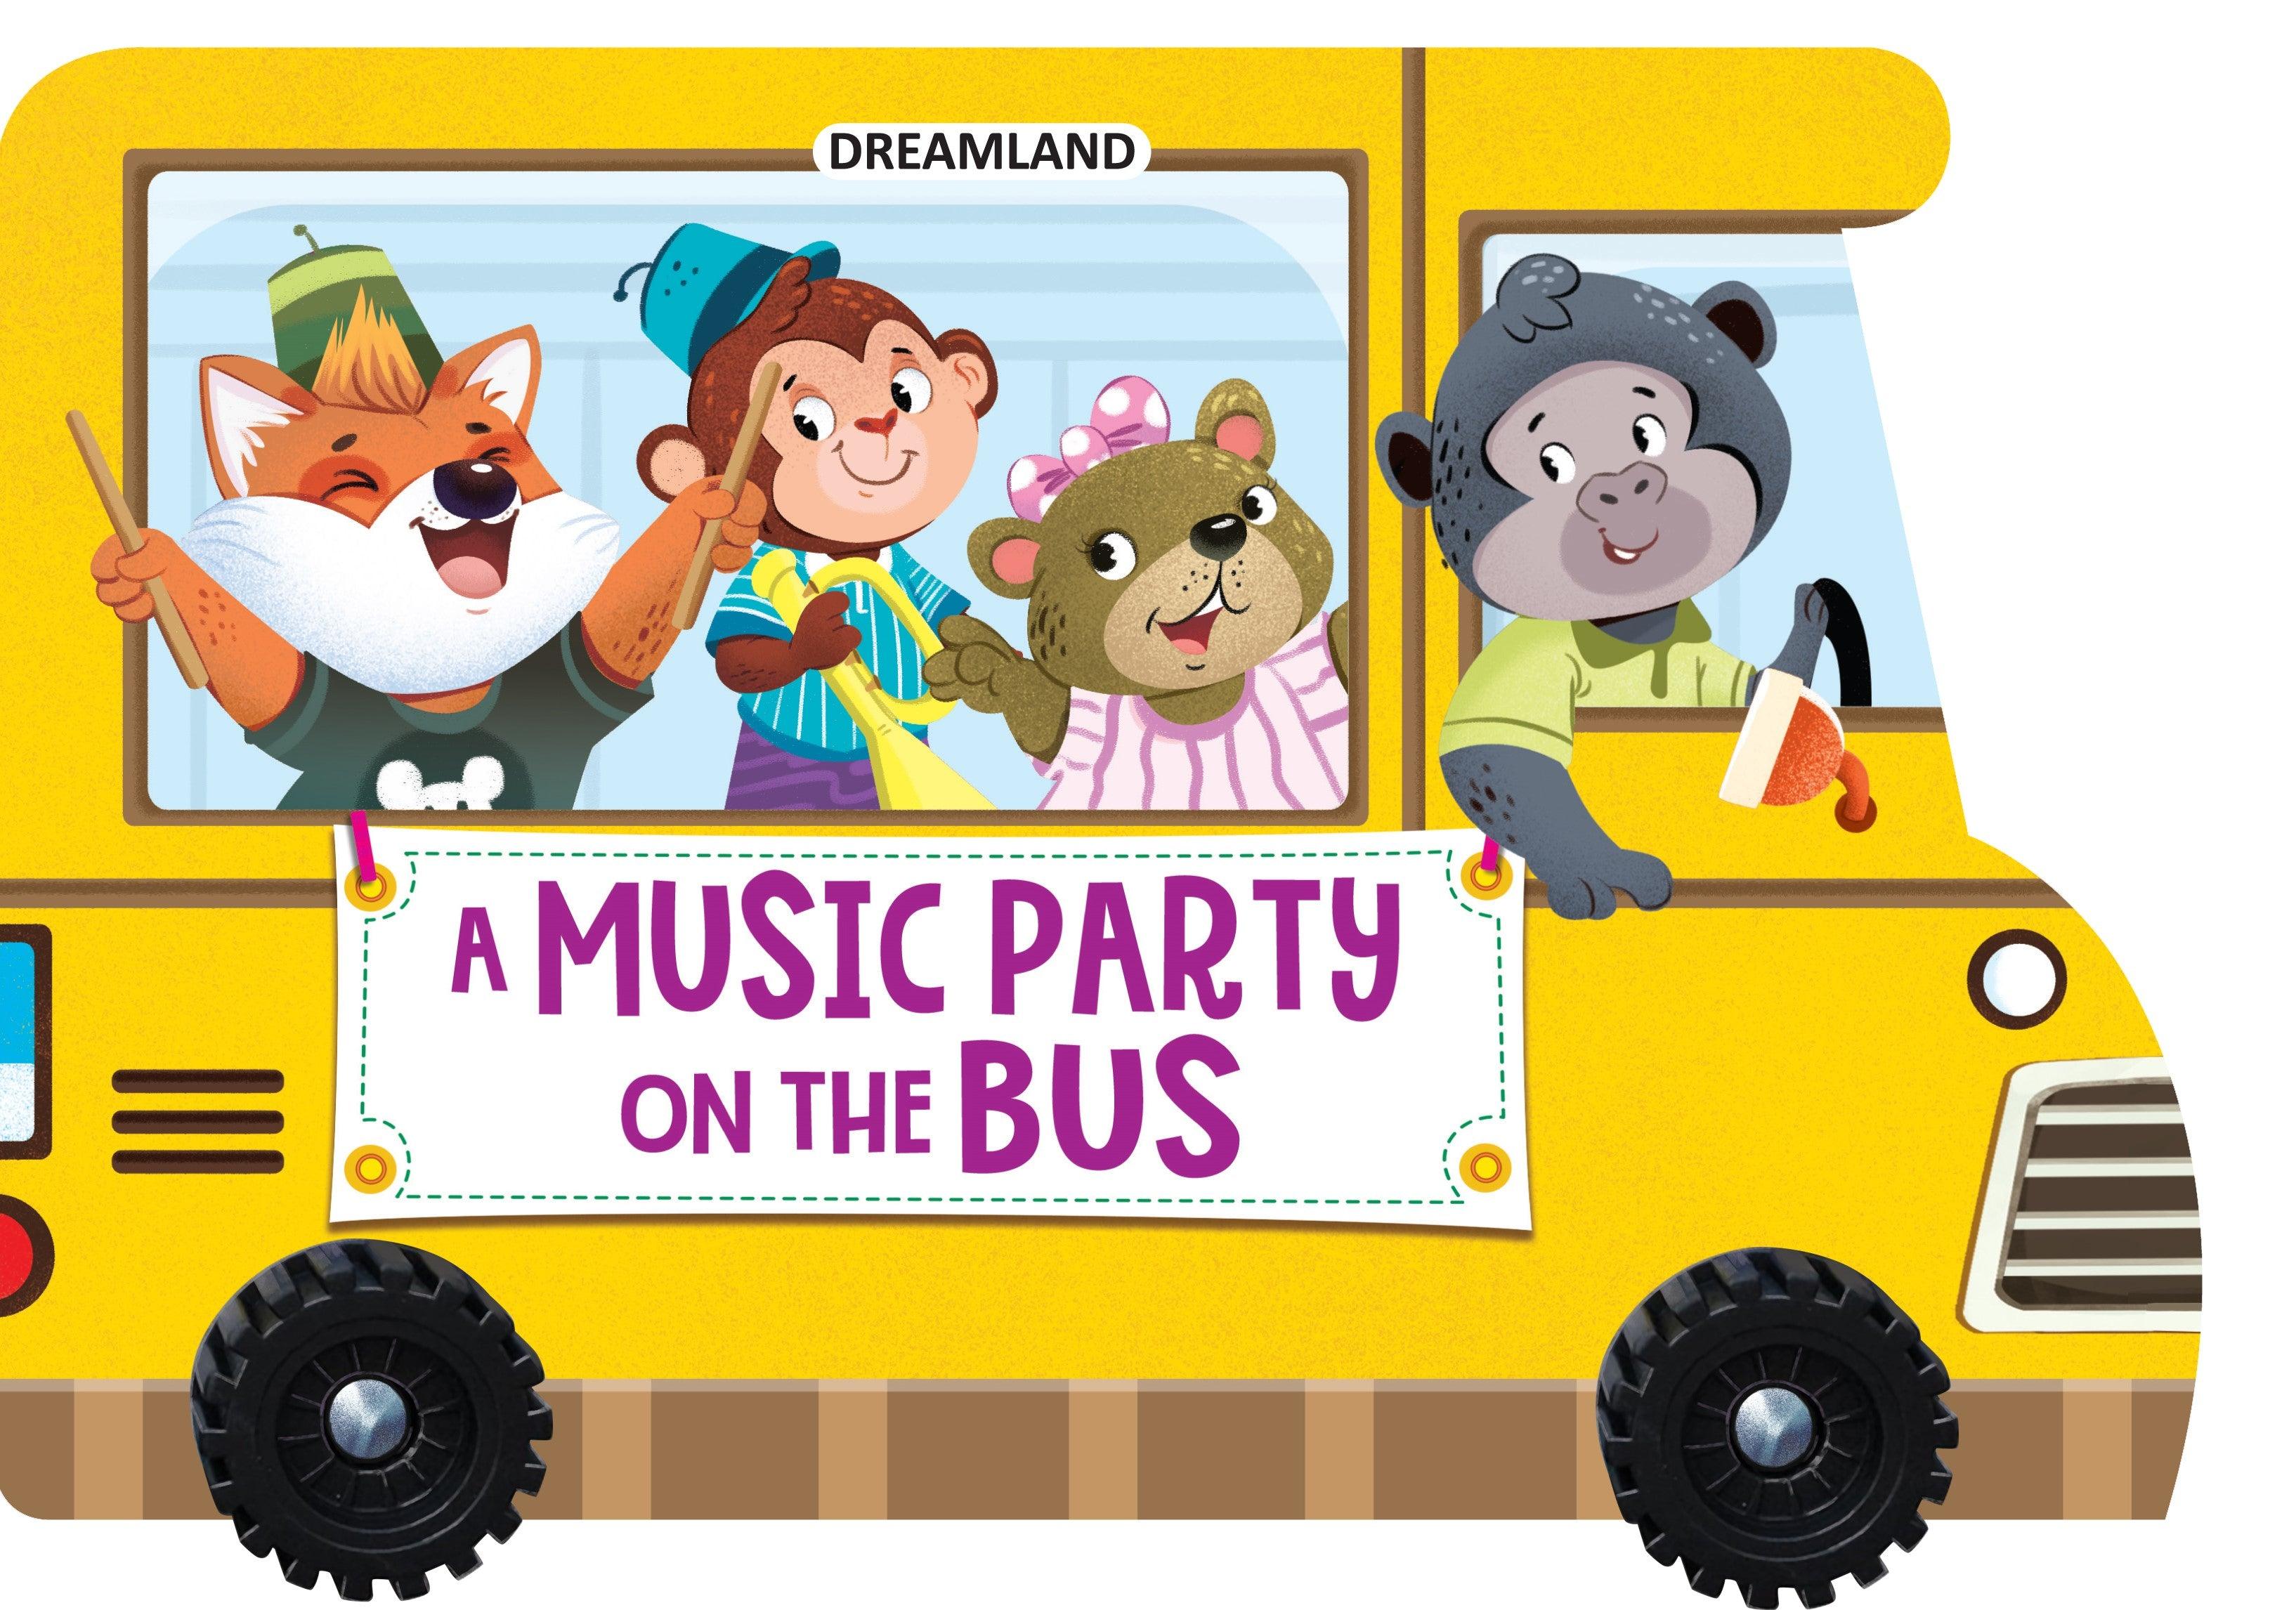 Dreamland A Music Party on the Bus - A Shaped Board book with Wheels - A Picture Book For Kids (English) - FunCorp India